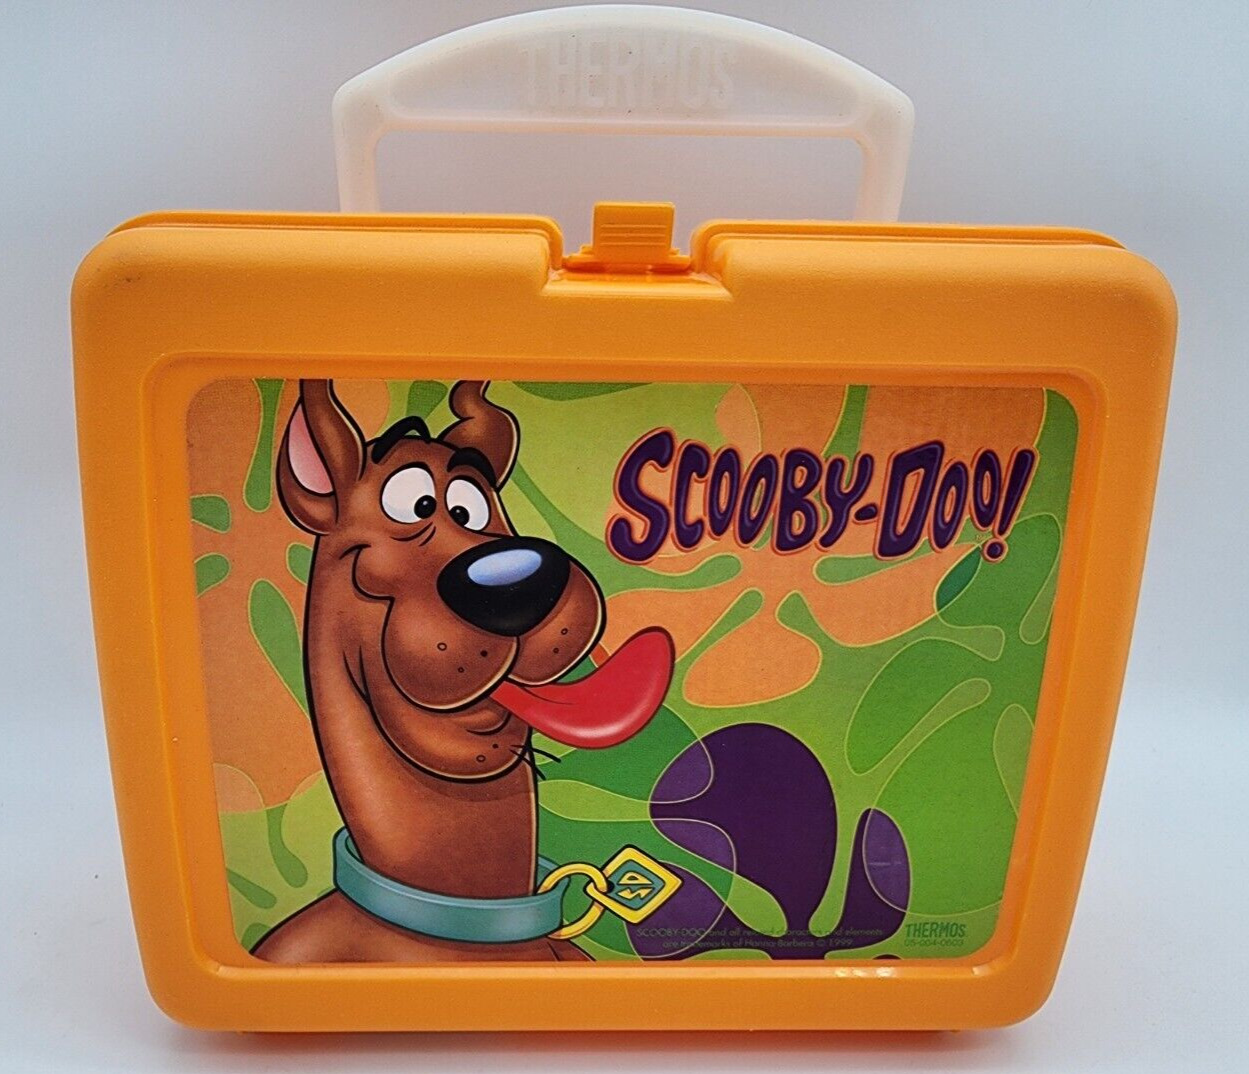 Vintage 1999 Thermos Scooby Doo Orange Plastic Collectible Lunchbox USA MADE